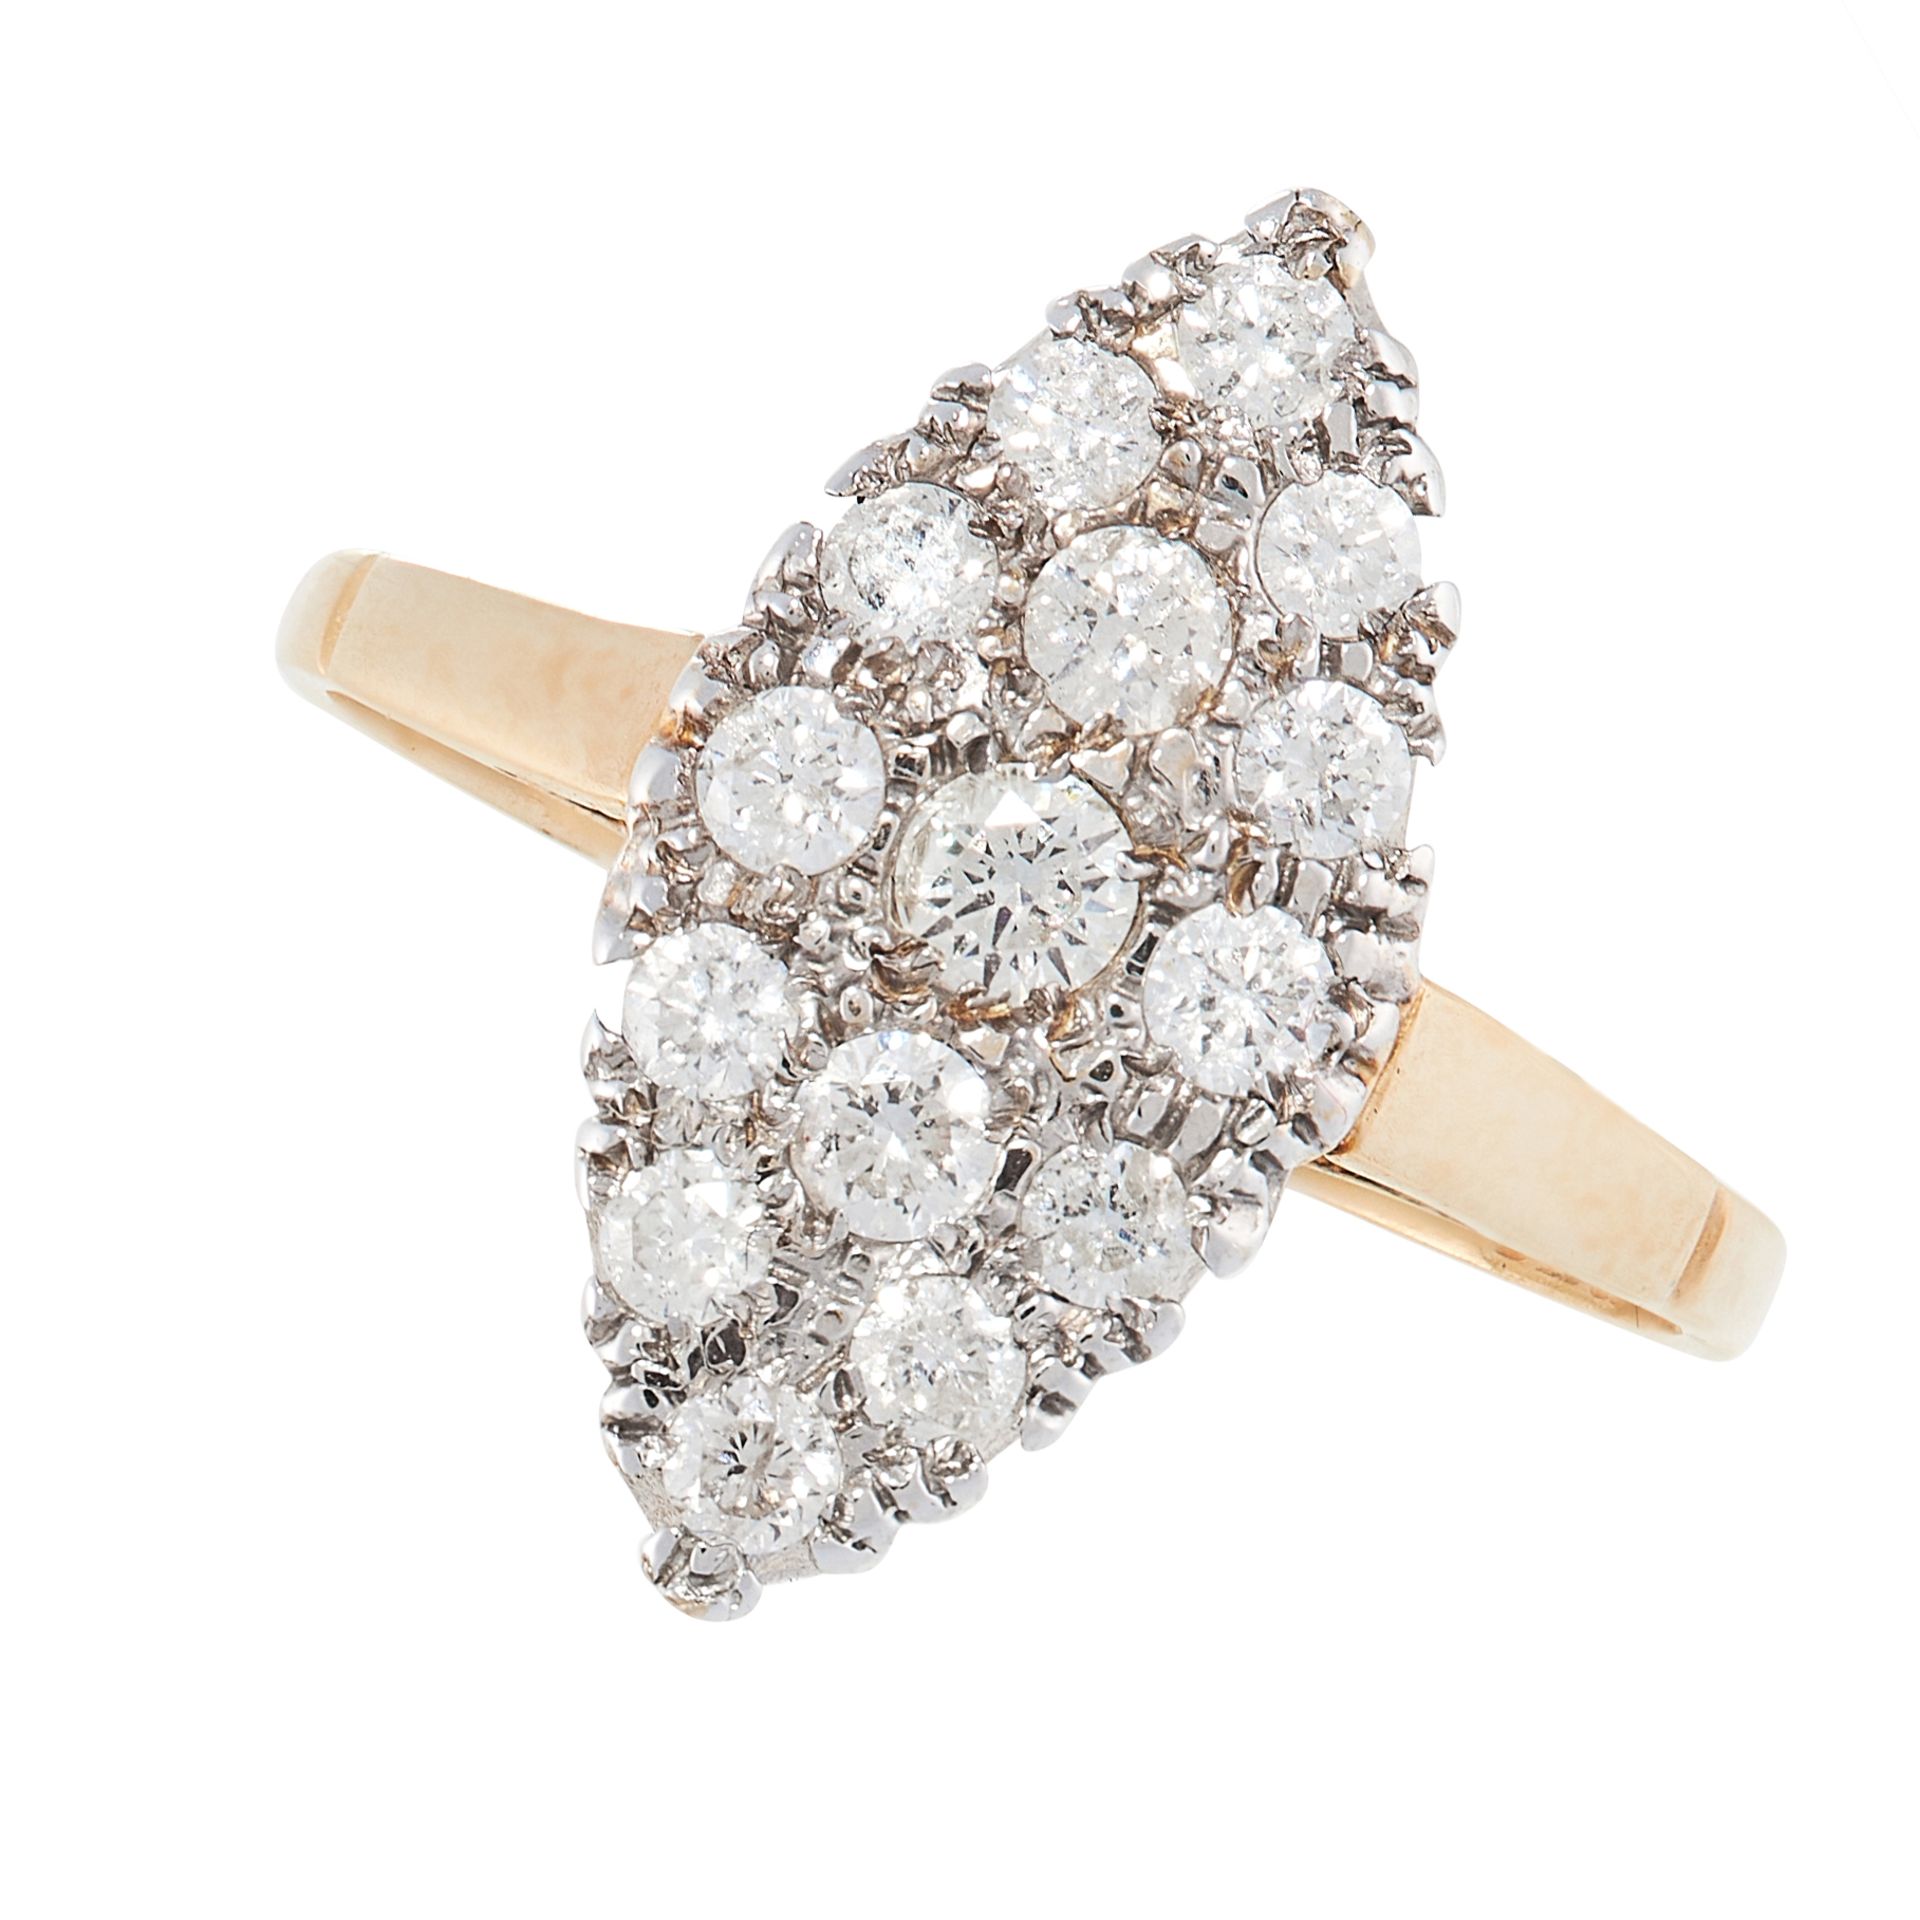 AN ANTIQUE DIAMOND RING in yellow gold, the navette face is pave set with old cut diamonds, all